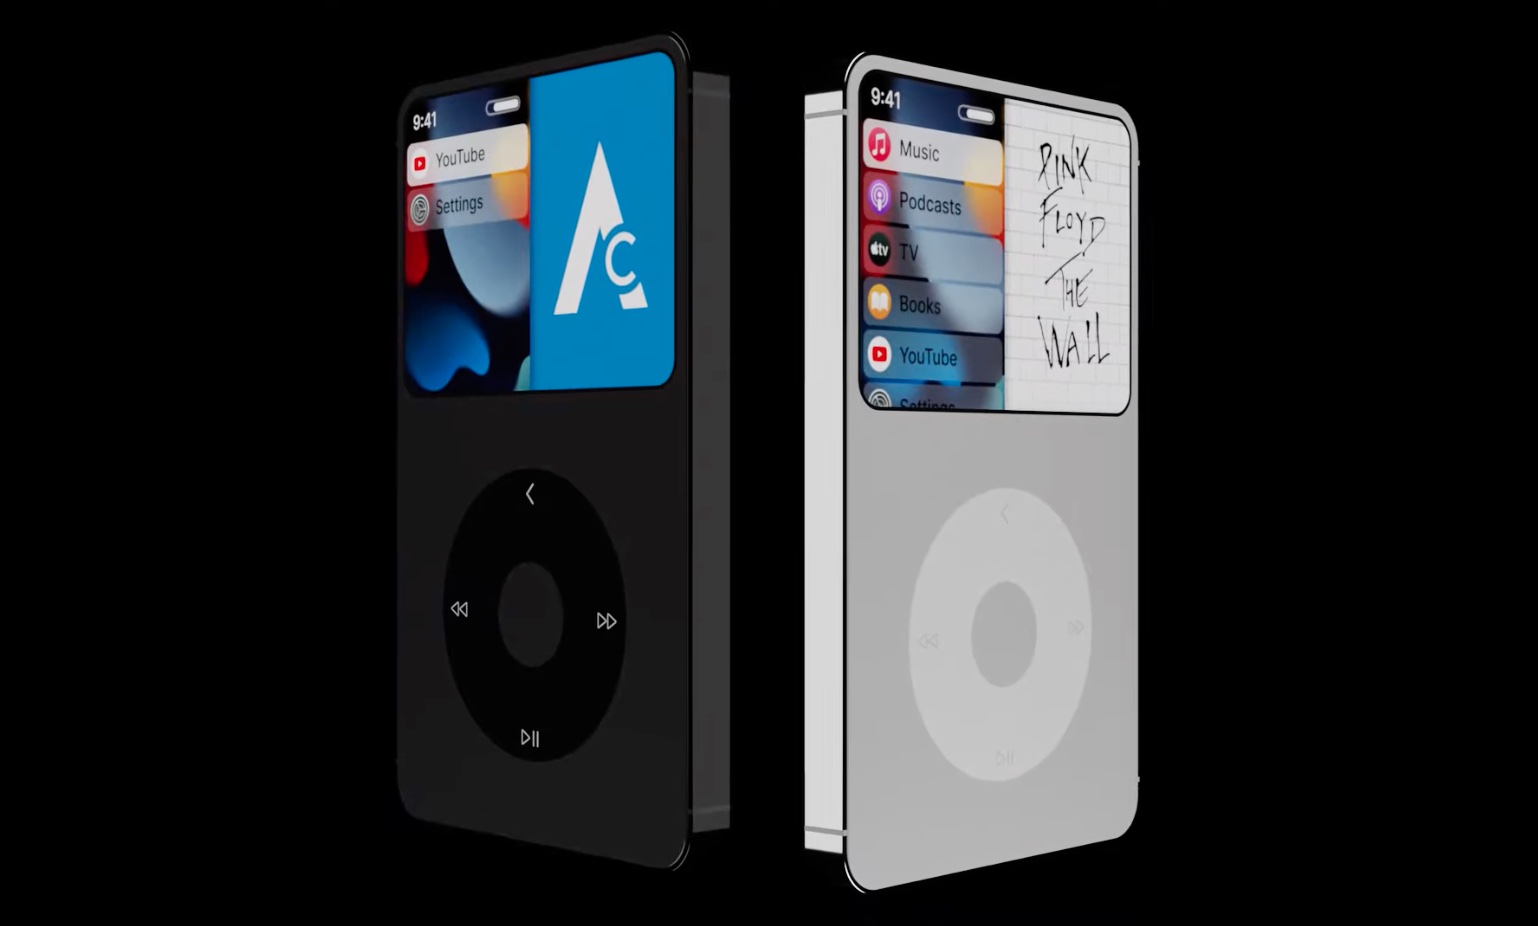 As iPod turns 20, imagine if Apple released this stunning iPod 2021